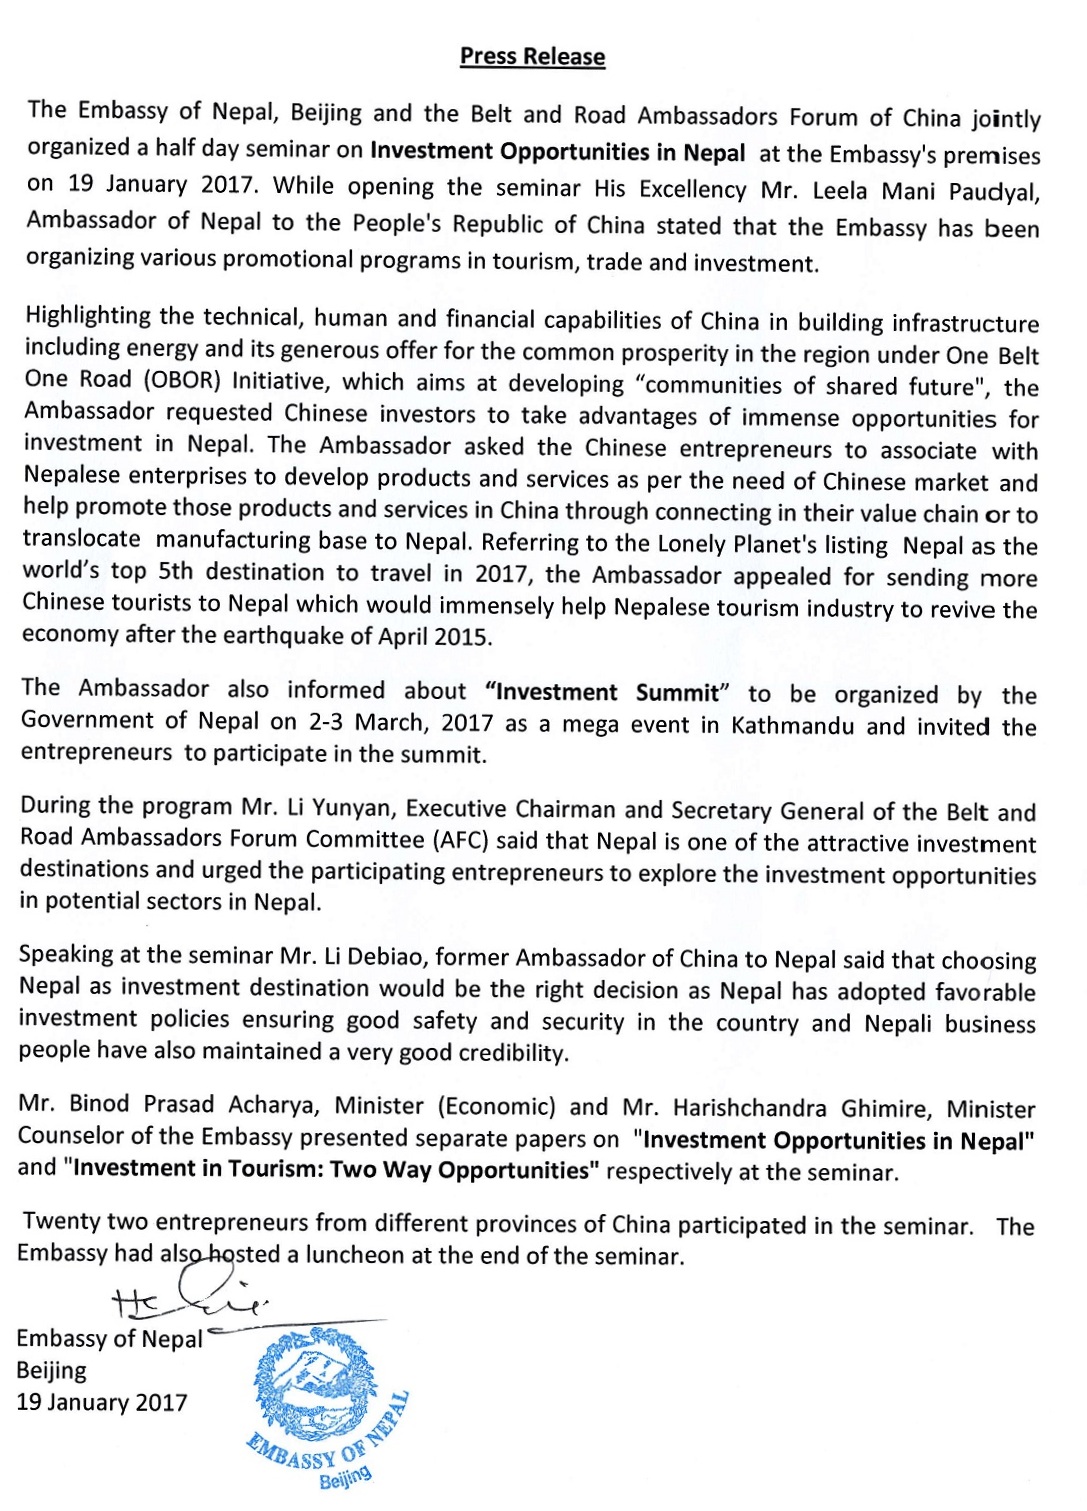 Press release-Investment opportunities in Nepal